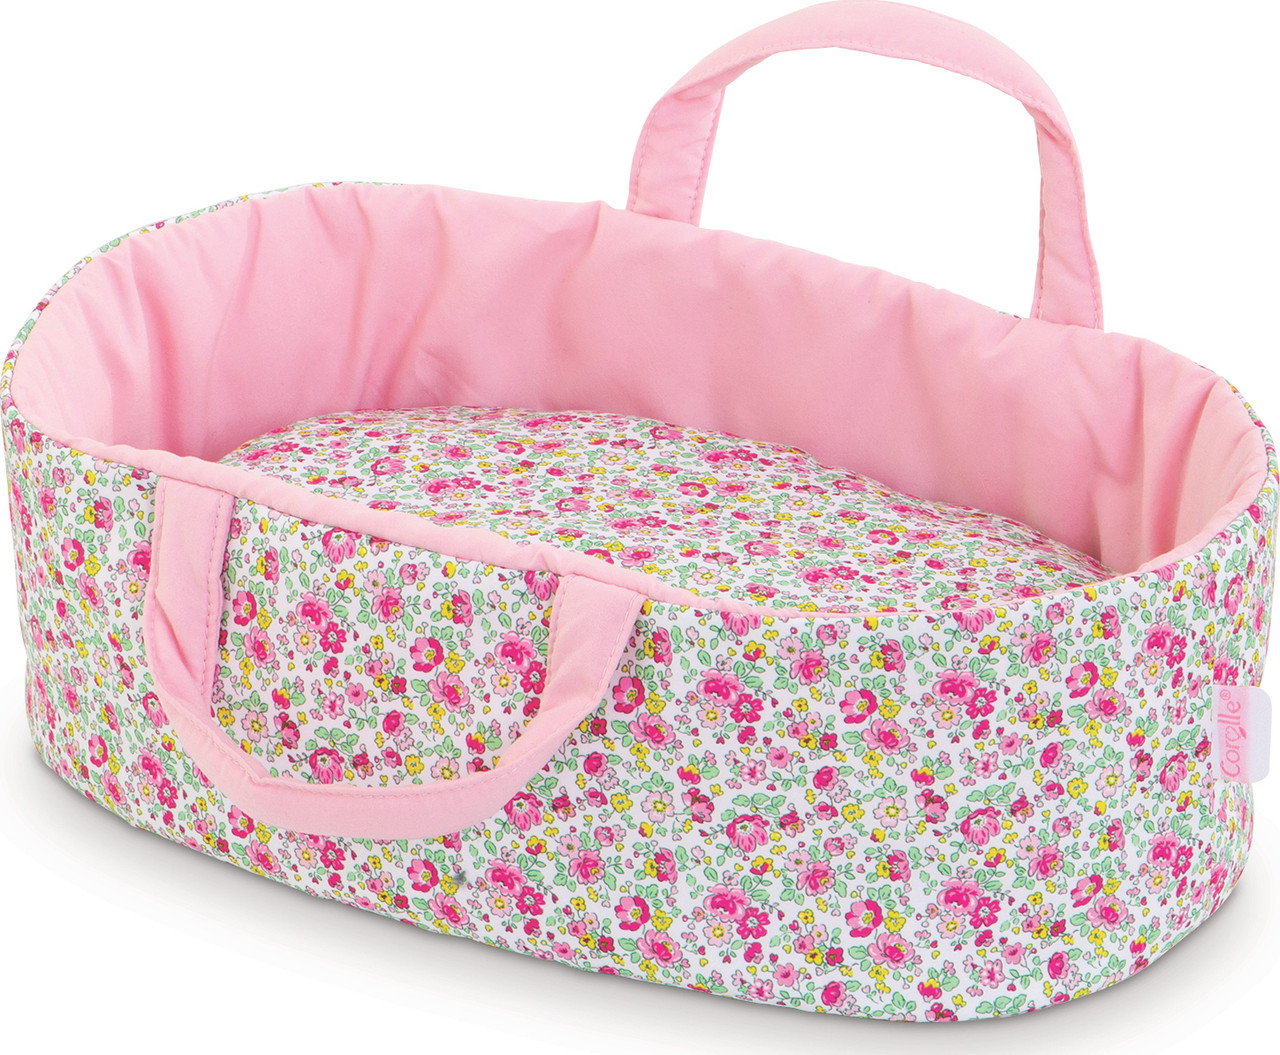 BB12" Carry Bed - Floral 1